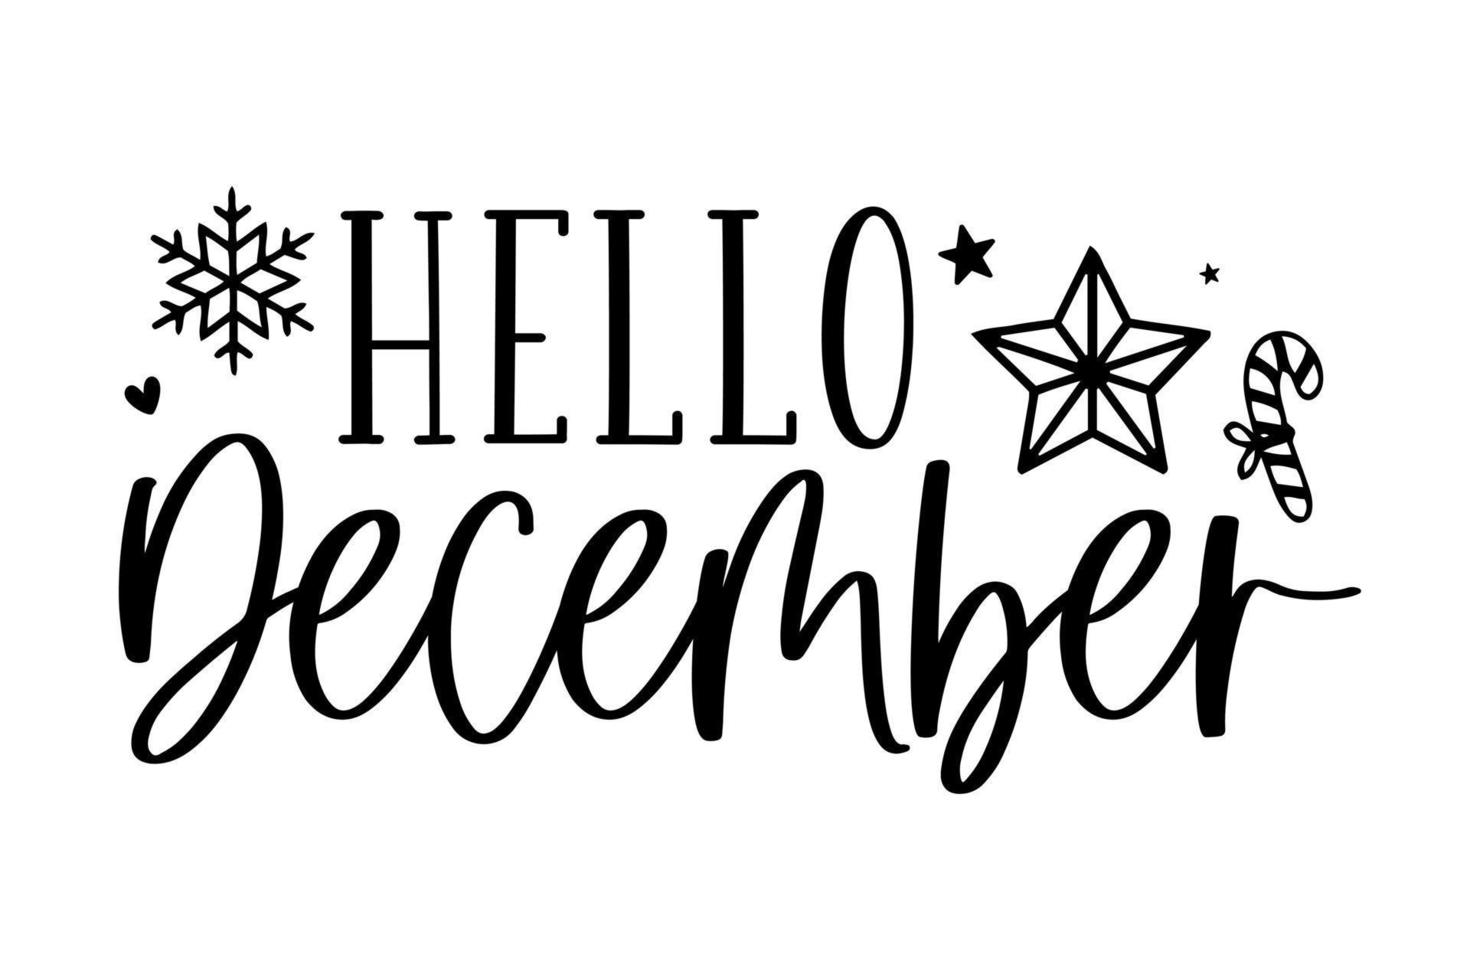 Christmas winter hello december lettering greeting card. Hand-drawn lettering poster for Christmas. Merry Christmas quotes calligraphy lettering isolated on white background, vector illustration.